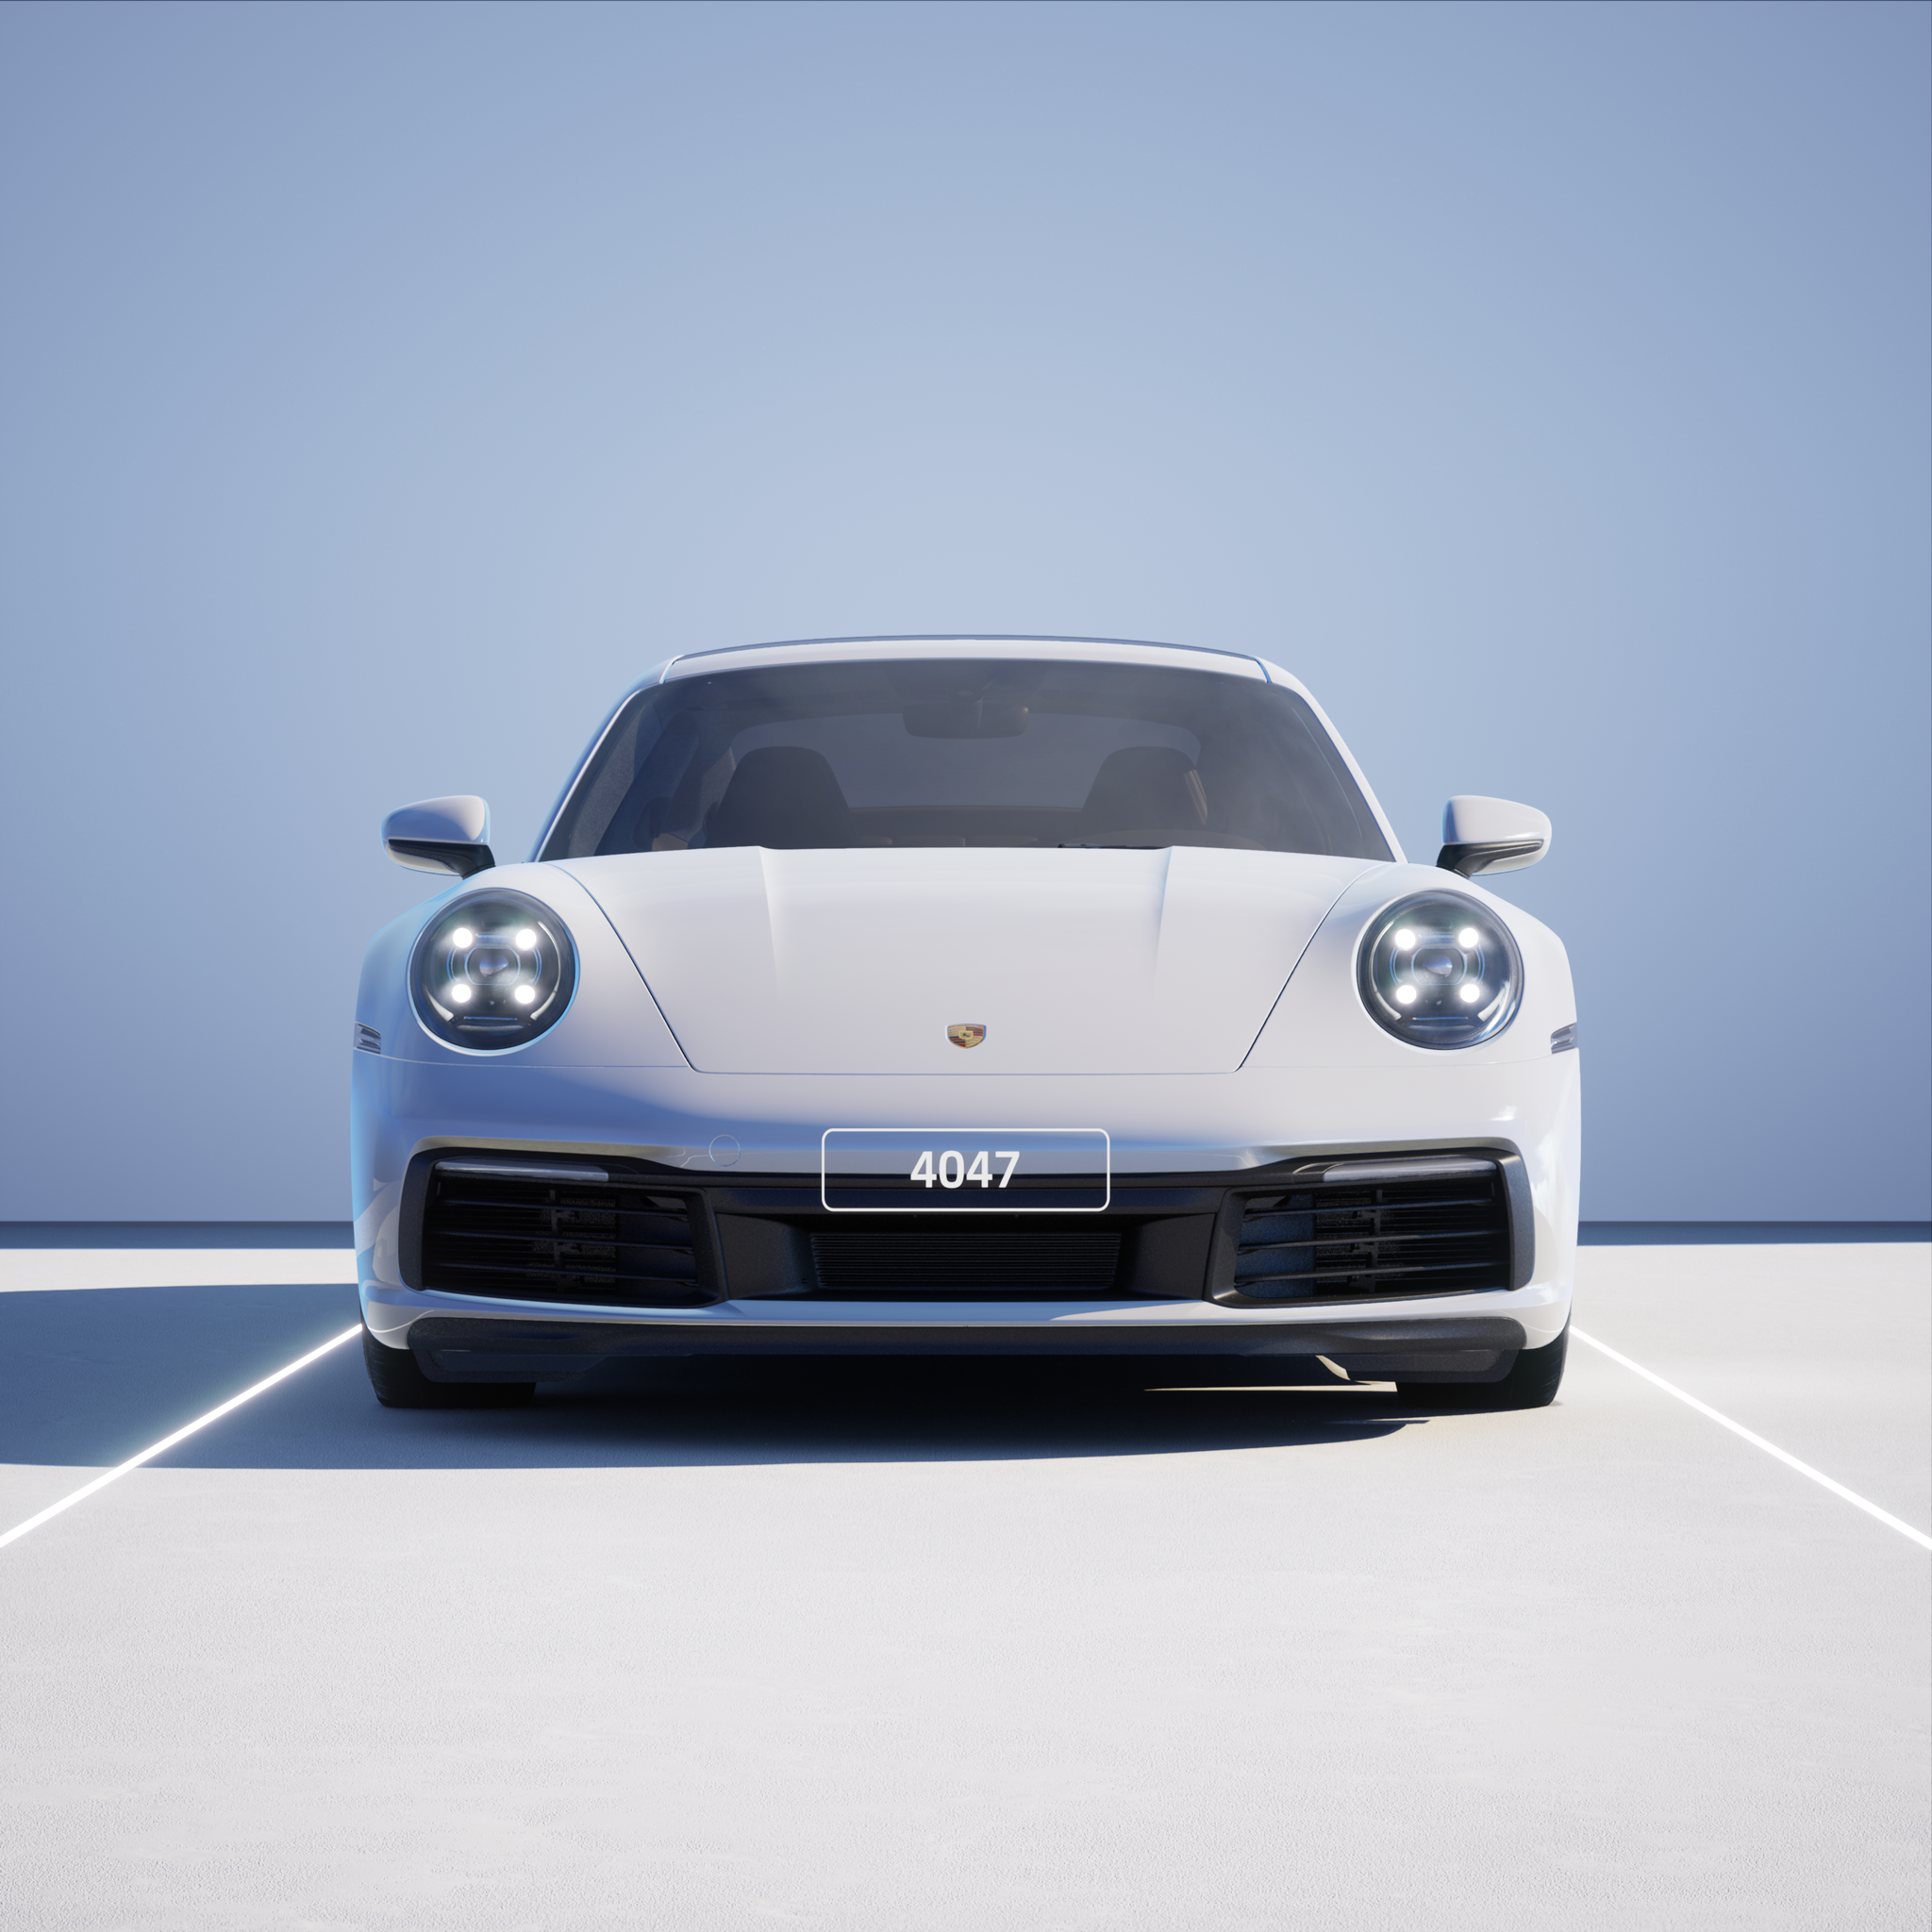 The PORSCHΞ 911 4047 image in phase